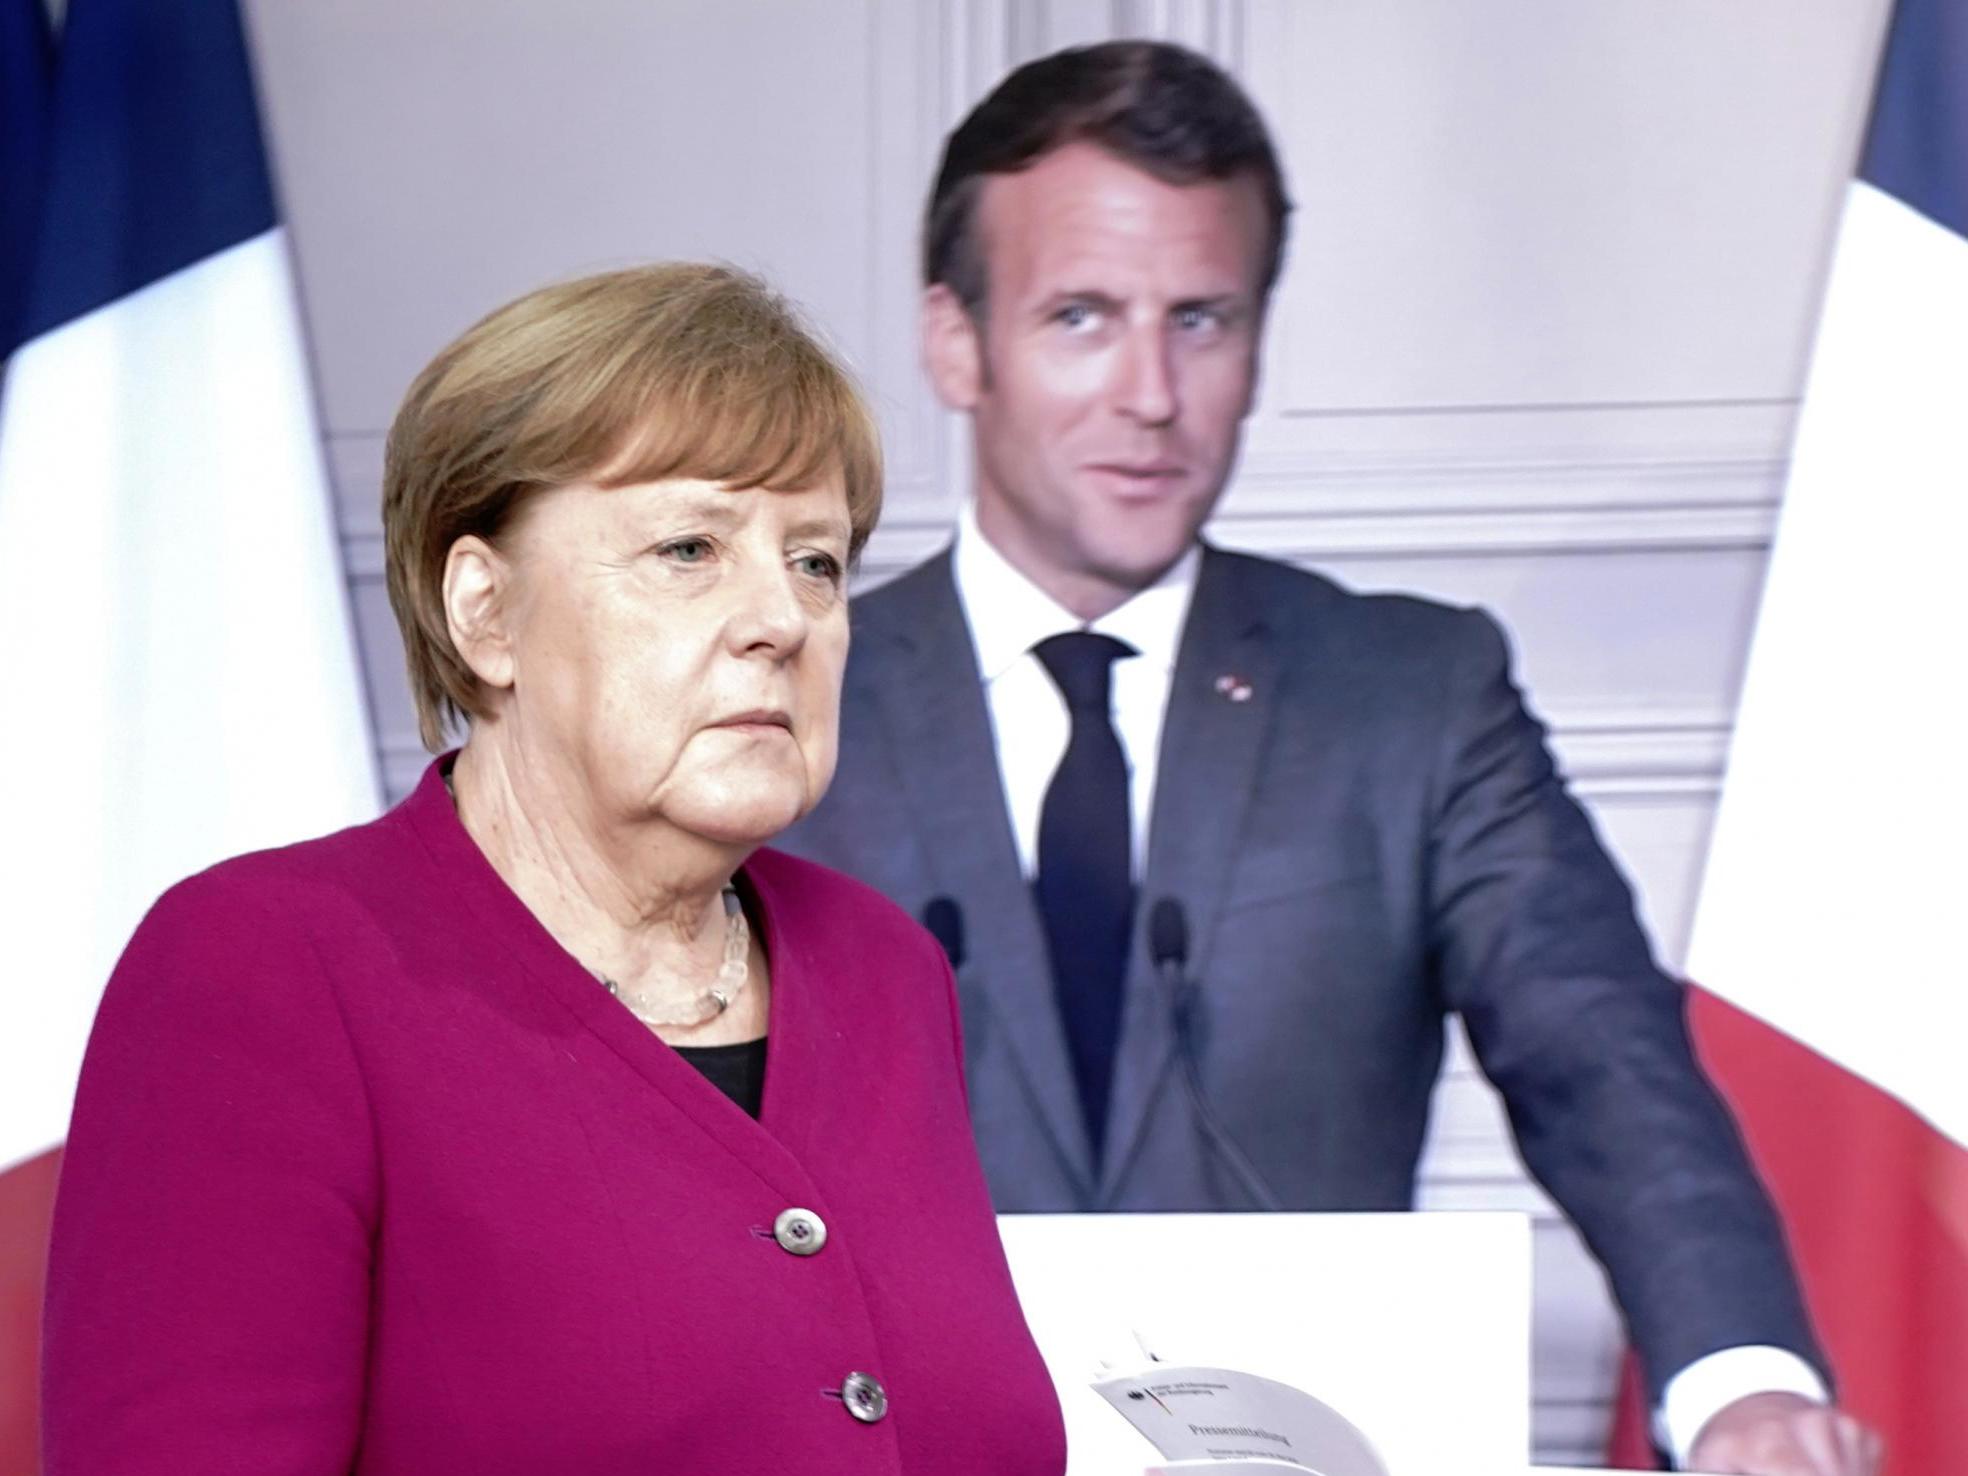 Angela Merkel and Emmanuel Macron hold a joint video news conference